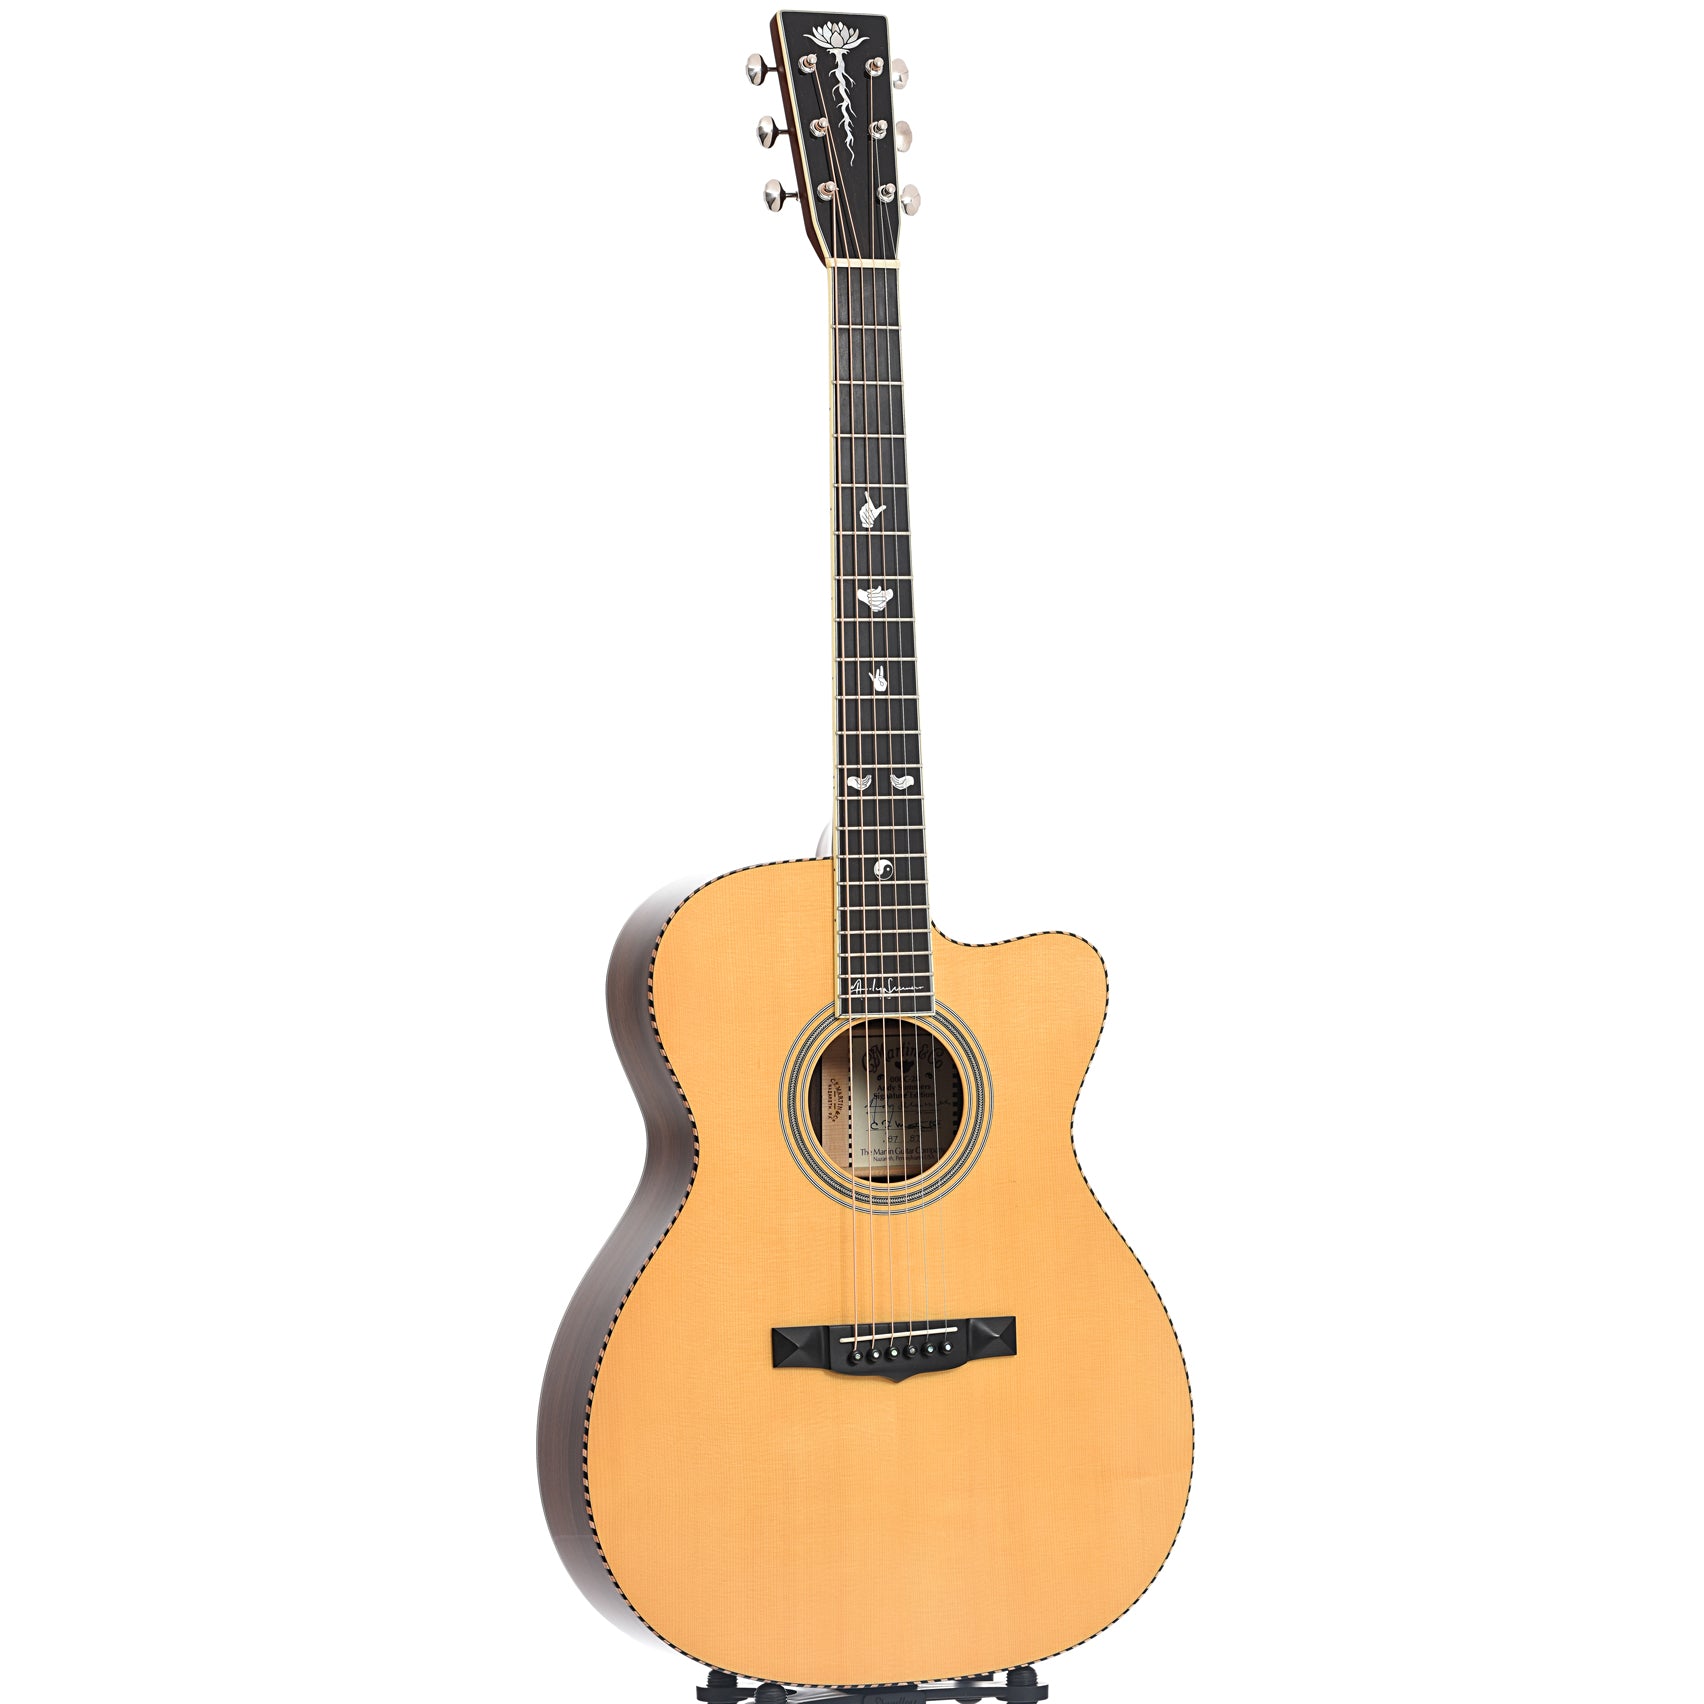 Full front and side of Martin 000C-28 Andy Summers Signature Model Acoustic Guitar (2006)